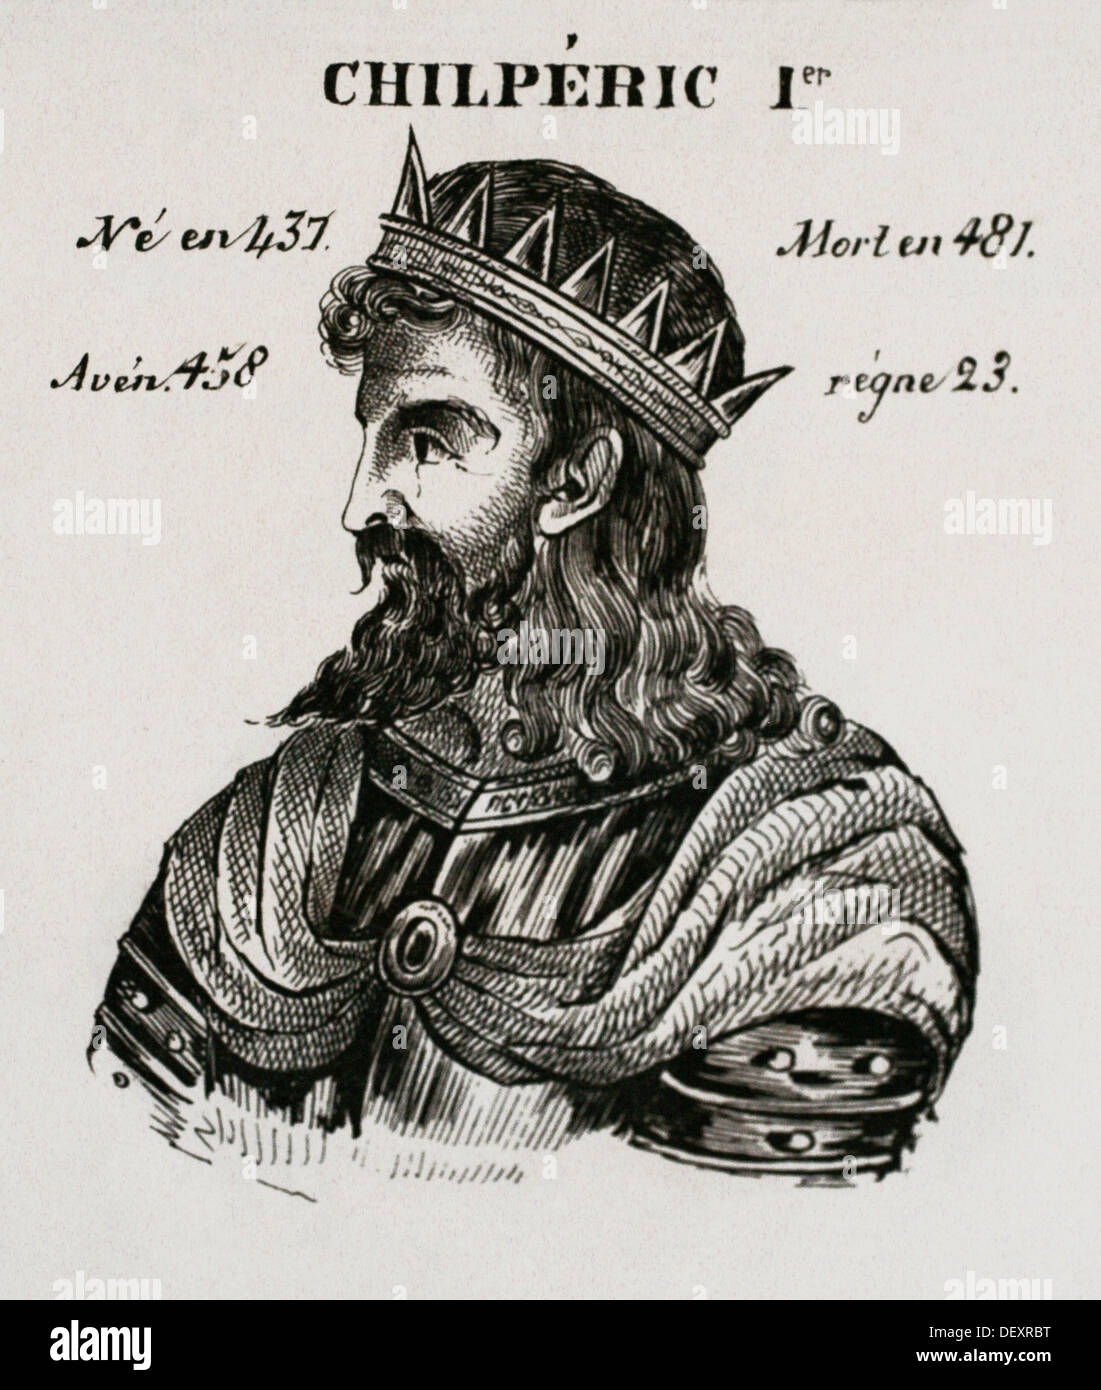 Chilpéric 1st, 4th king of France. from 458 to 481. History of France, by  J.Henry (1842) Stock Photo